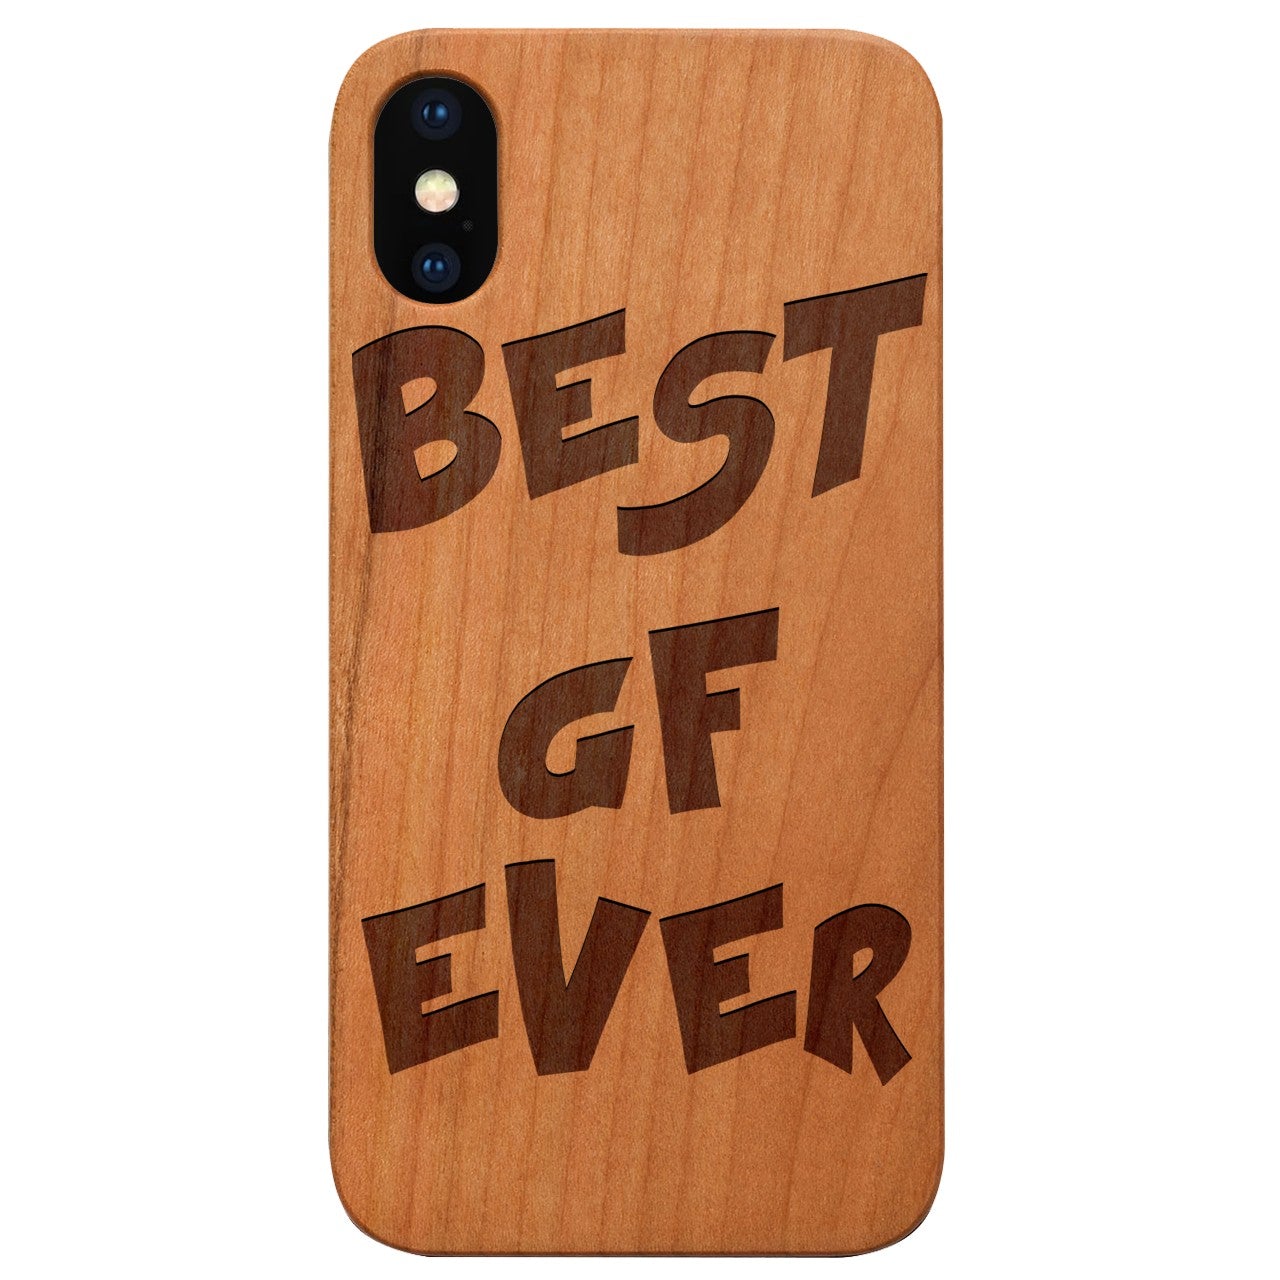  Best Gf Ever - Engraved - Wooden Phone Case - IPhone 13 Models